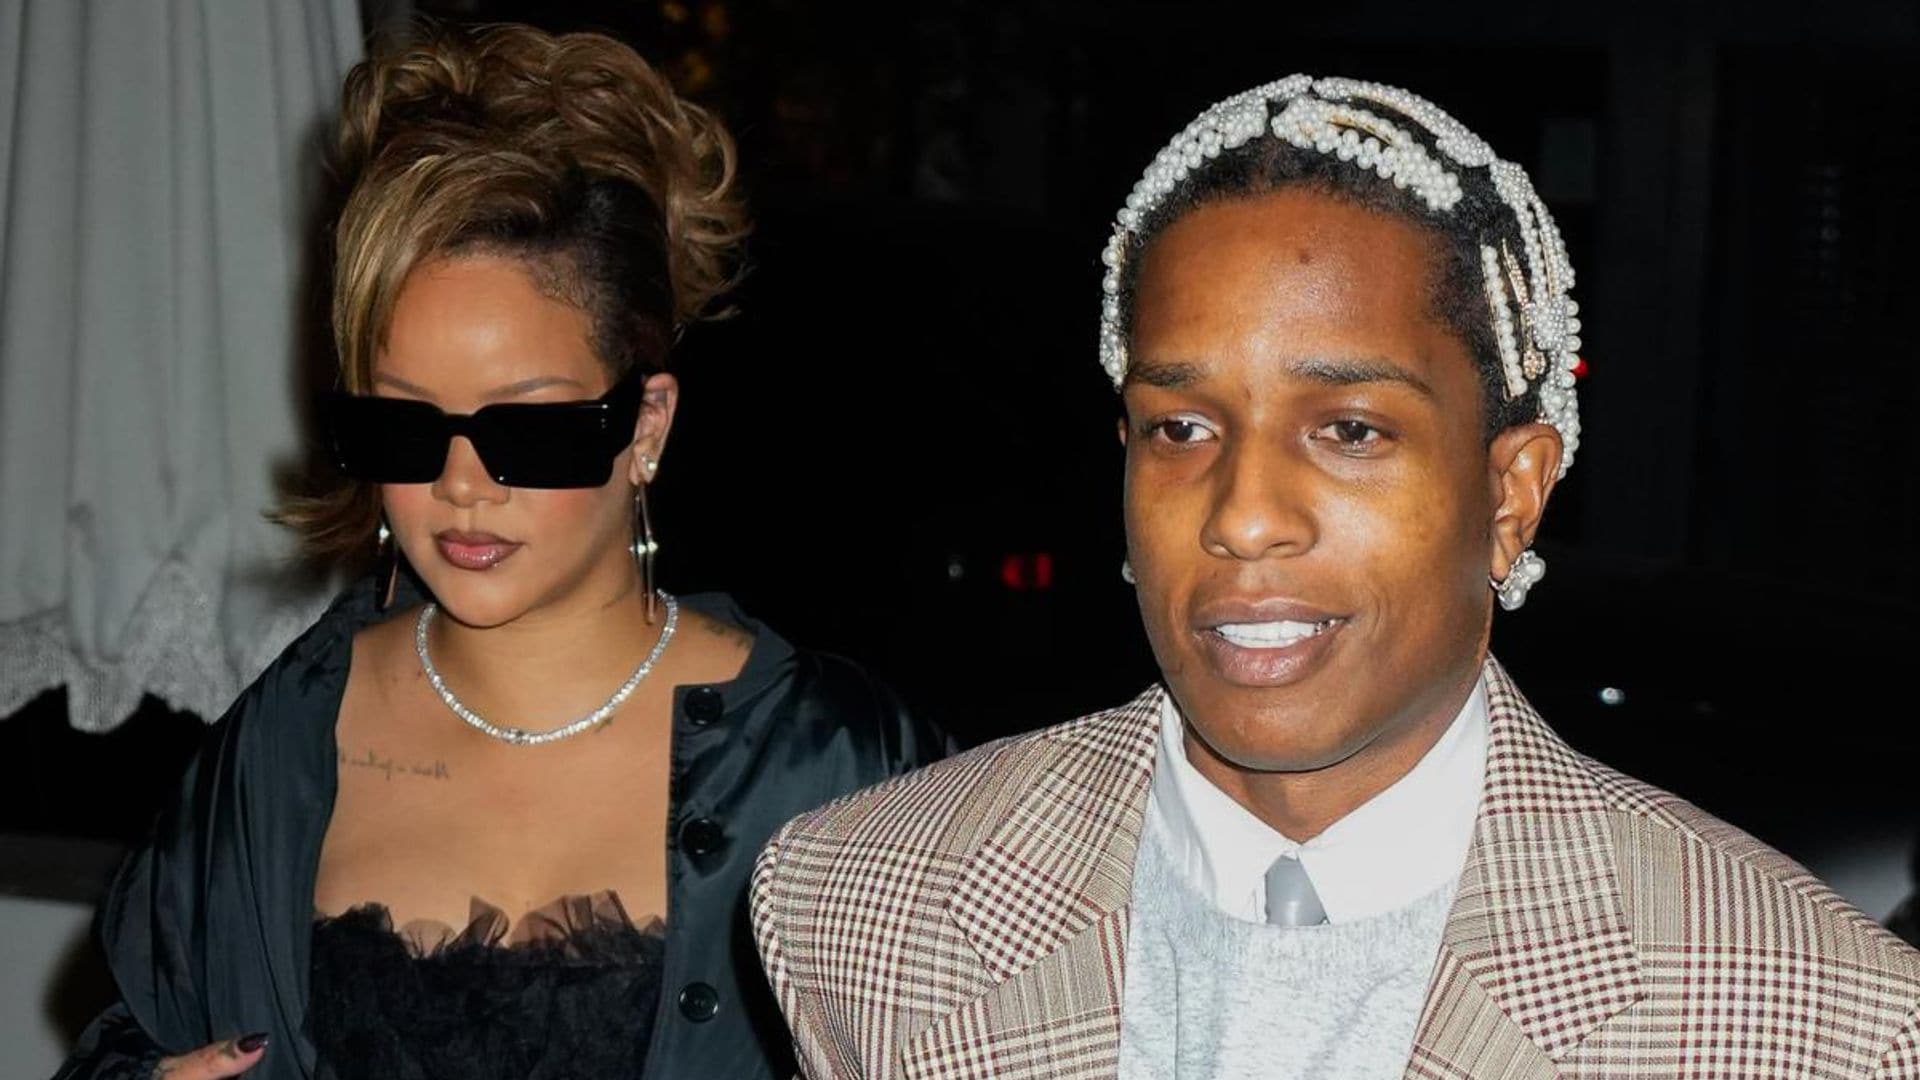 Rihanna and A$AP Rocky celebrate their son’s second birthday and Mother’s Day